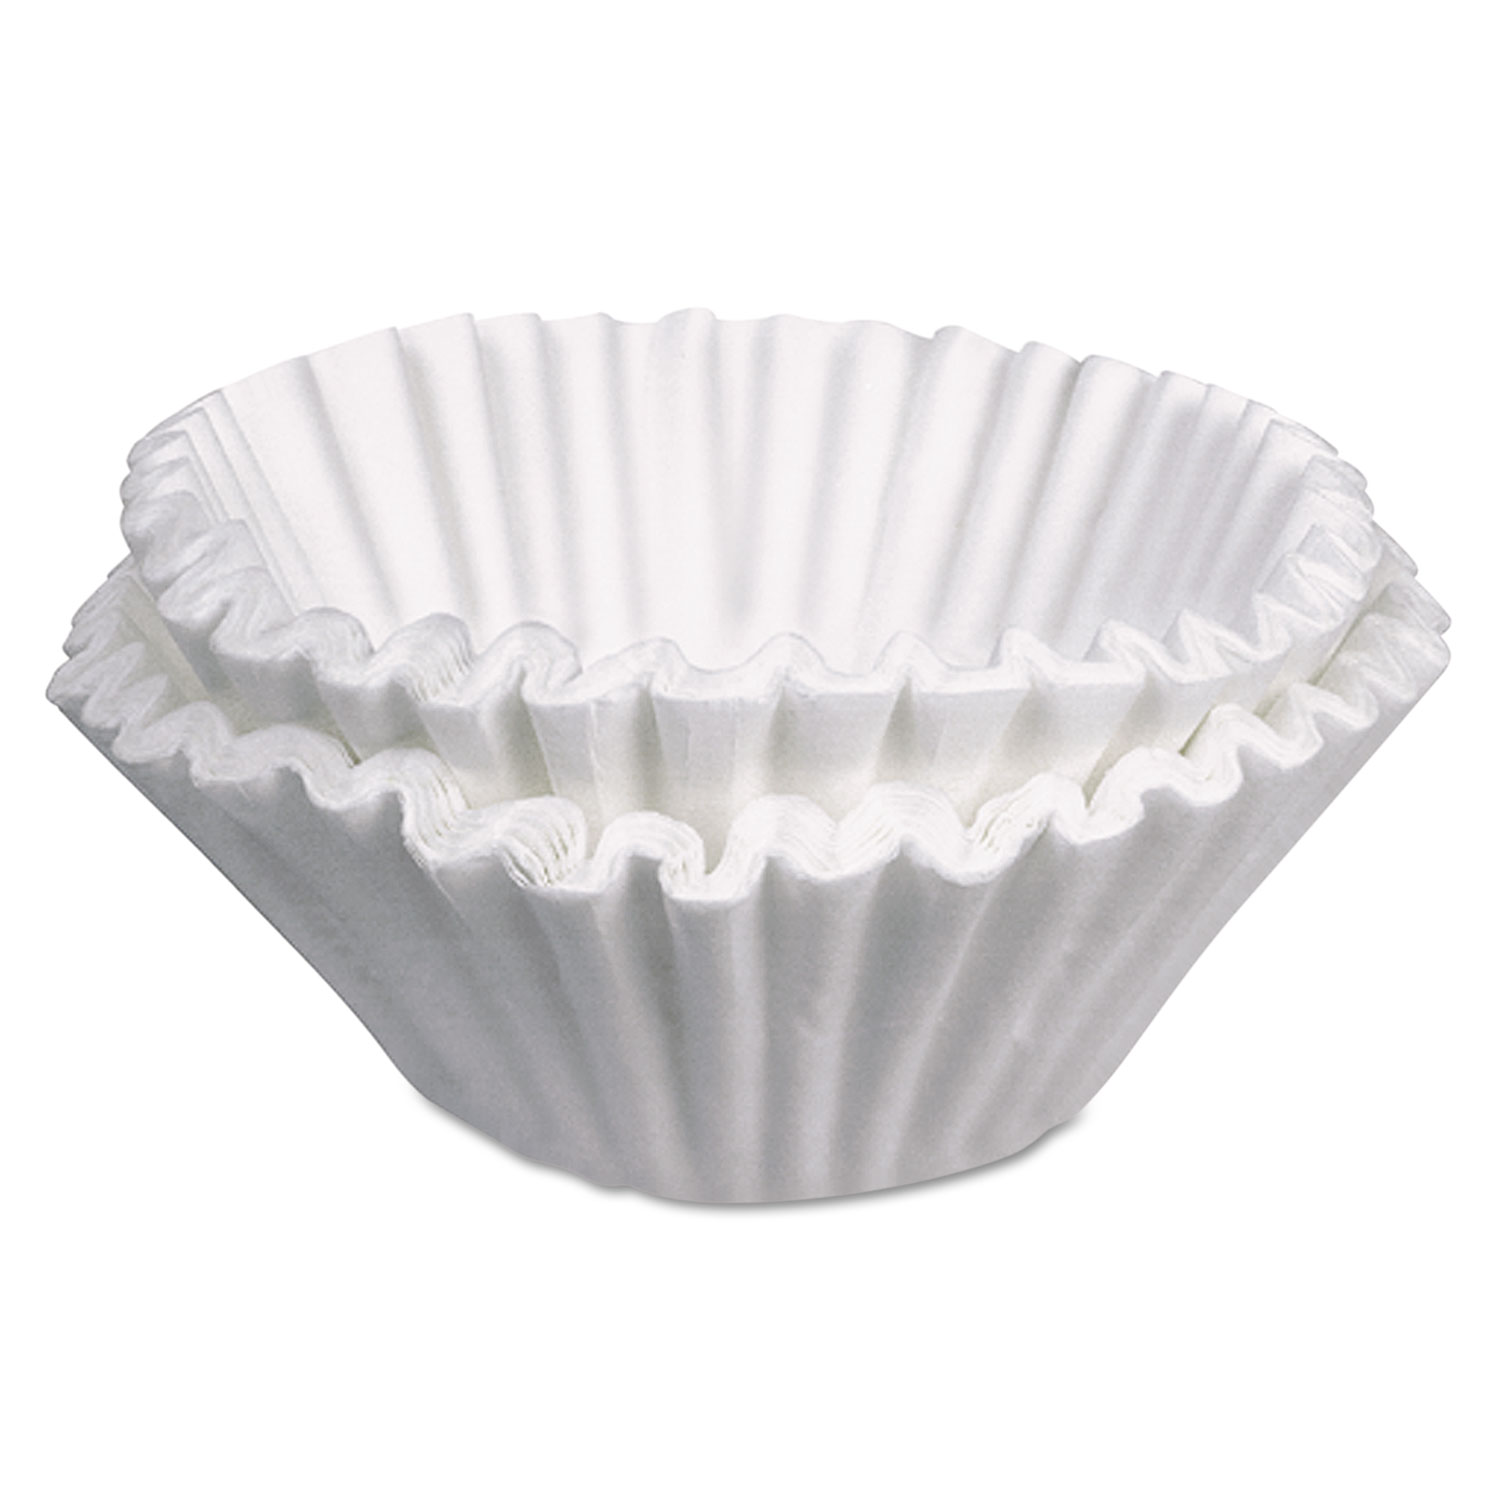 Commercial Coffee Filters, 10 Gallon Urn Style, 250/Pack